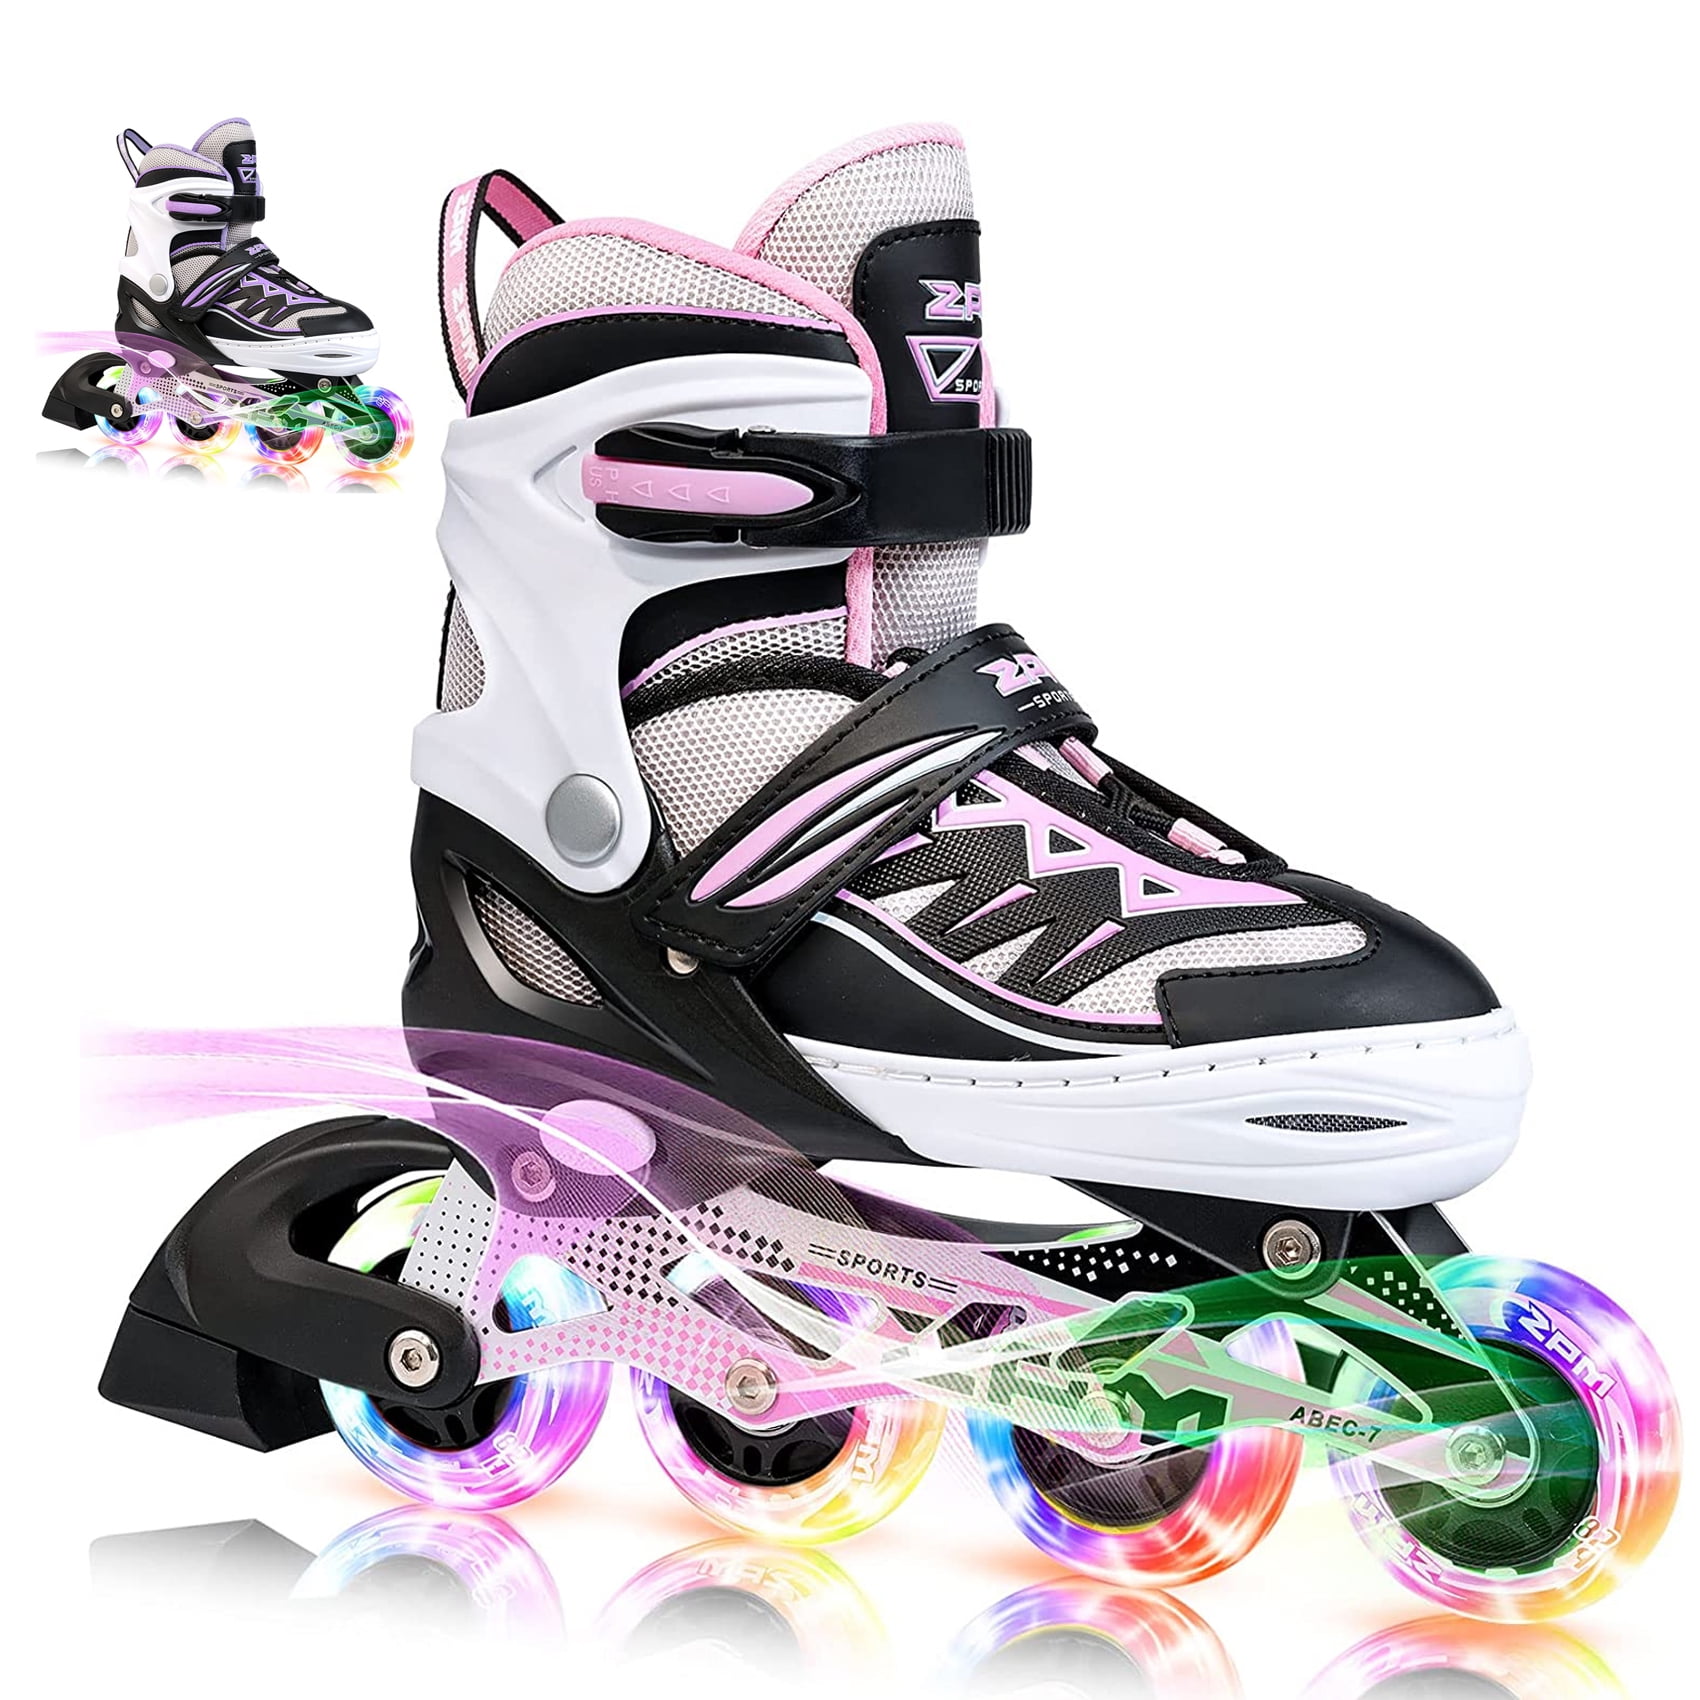 Details about   Inline Skates with RGB Lighting Wheels Roller Blades for Kids Men Women Gifts US 